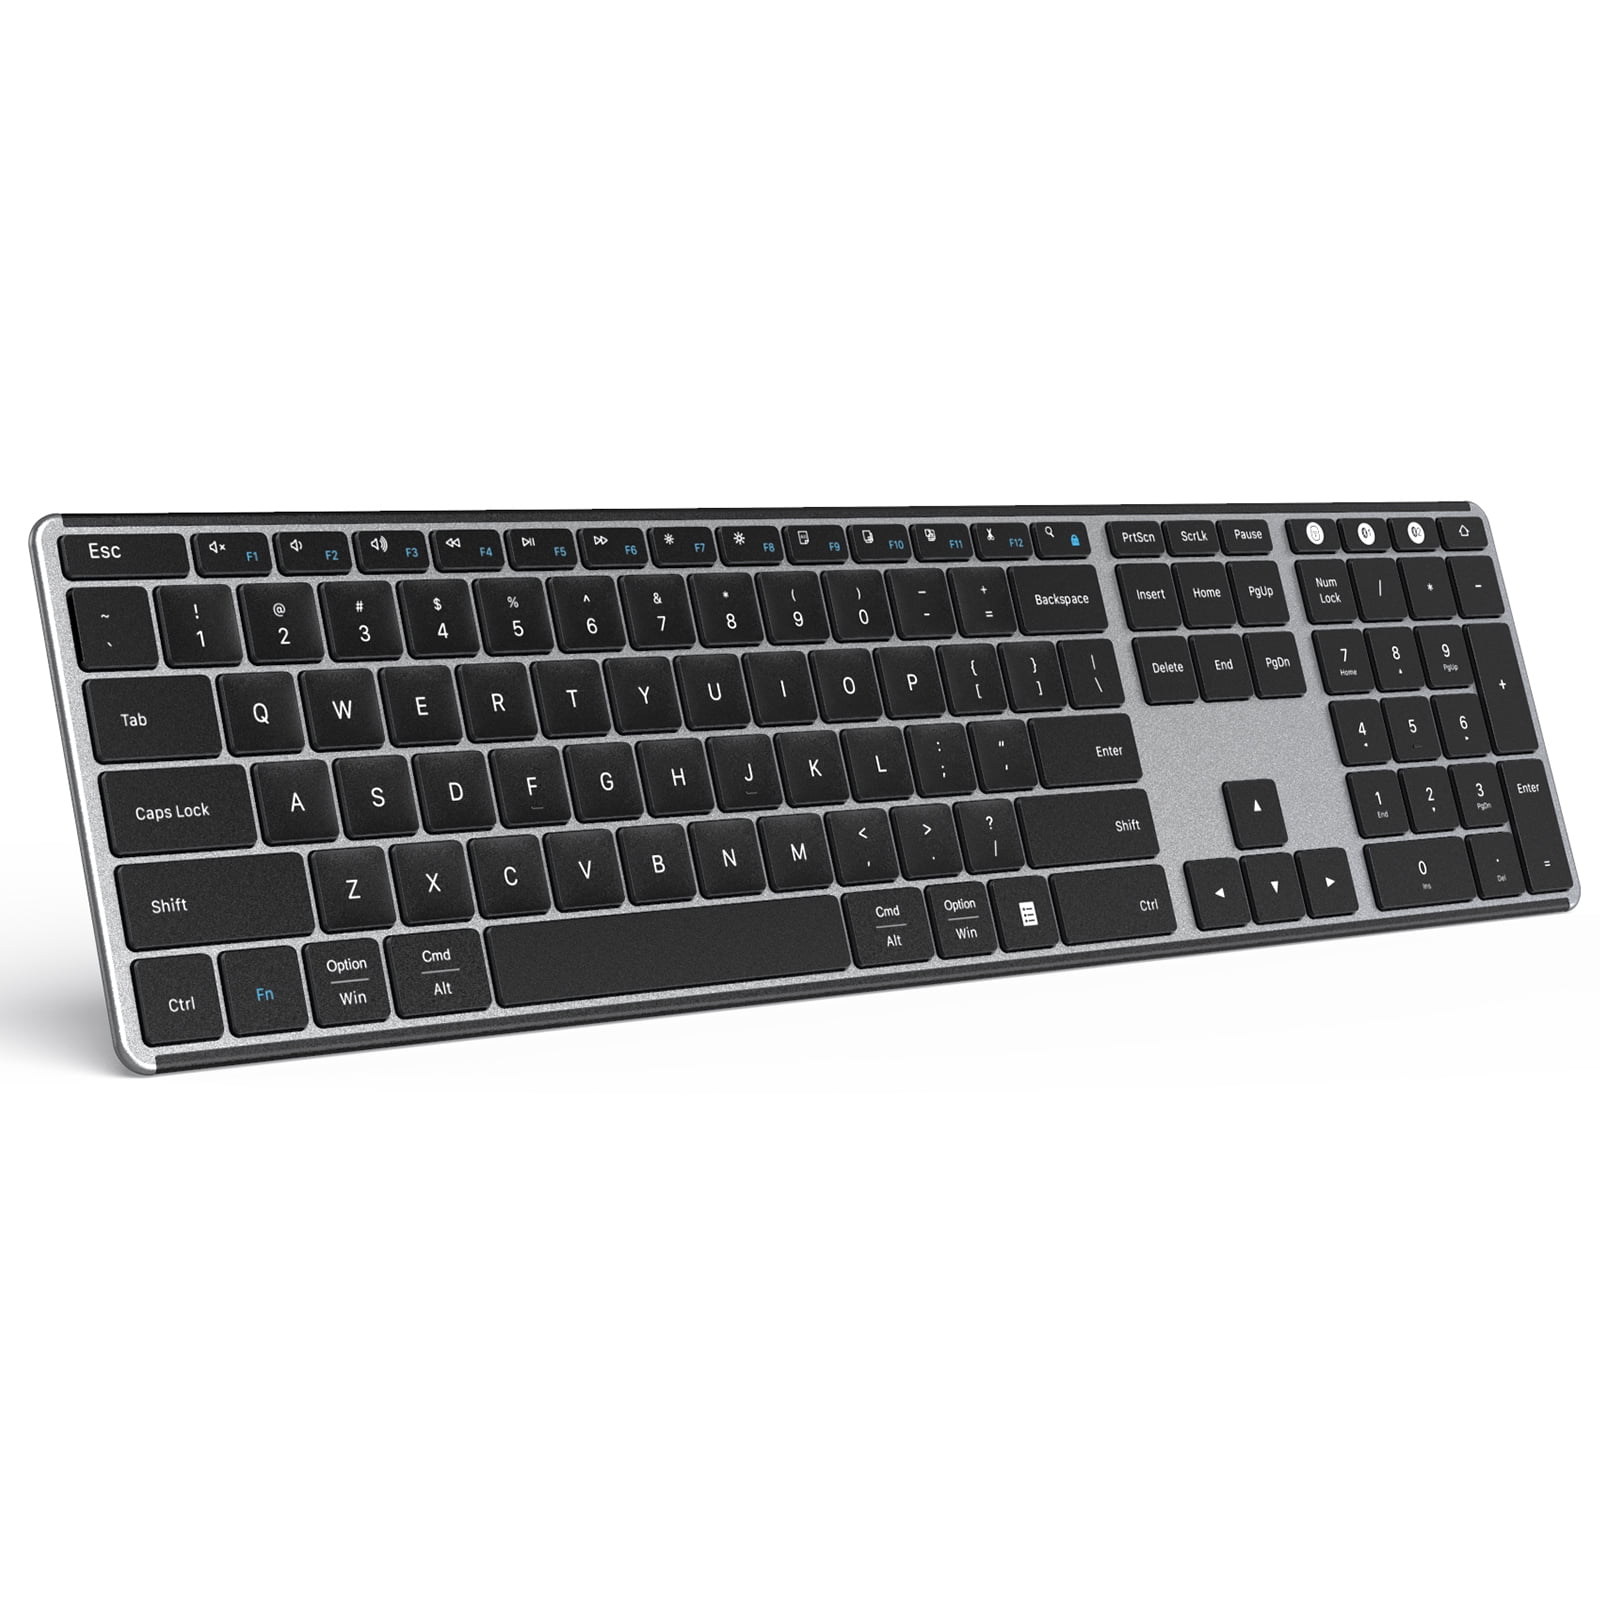 Wireless Illuminated Rechargeable Keyboard with Number Pad Connect Up to 4 Devices Compatible Mac Android iOS Windows seenda Multi-Device Bluetooth Backlit Keyboard for Tablet Phone Computer 